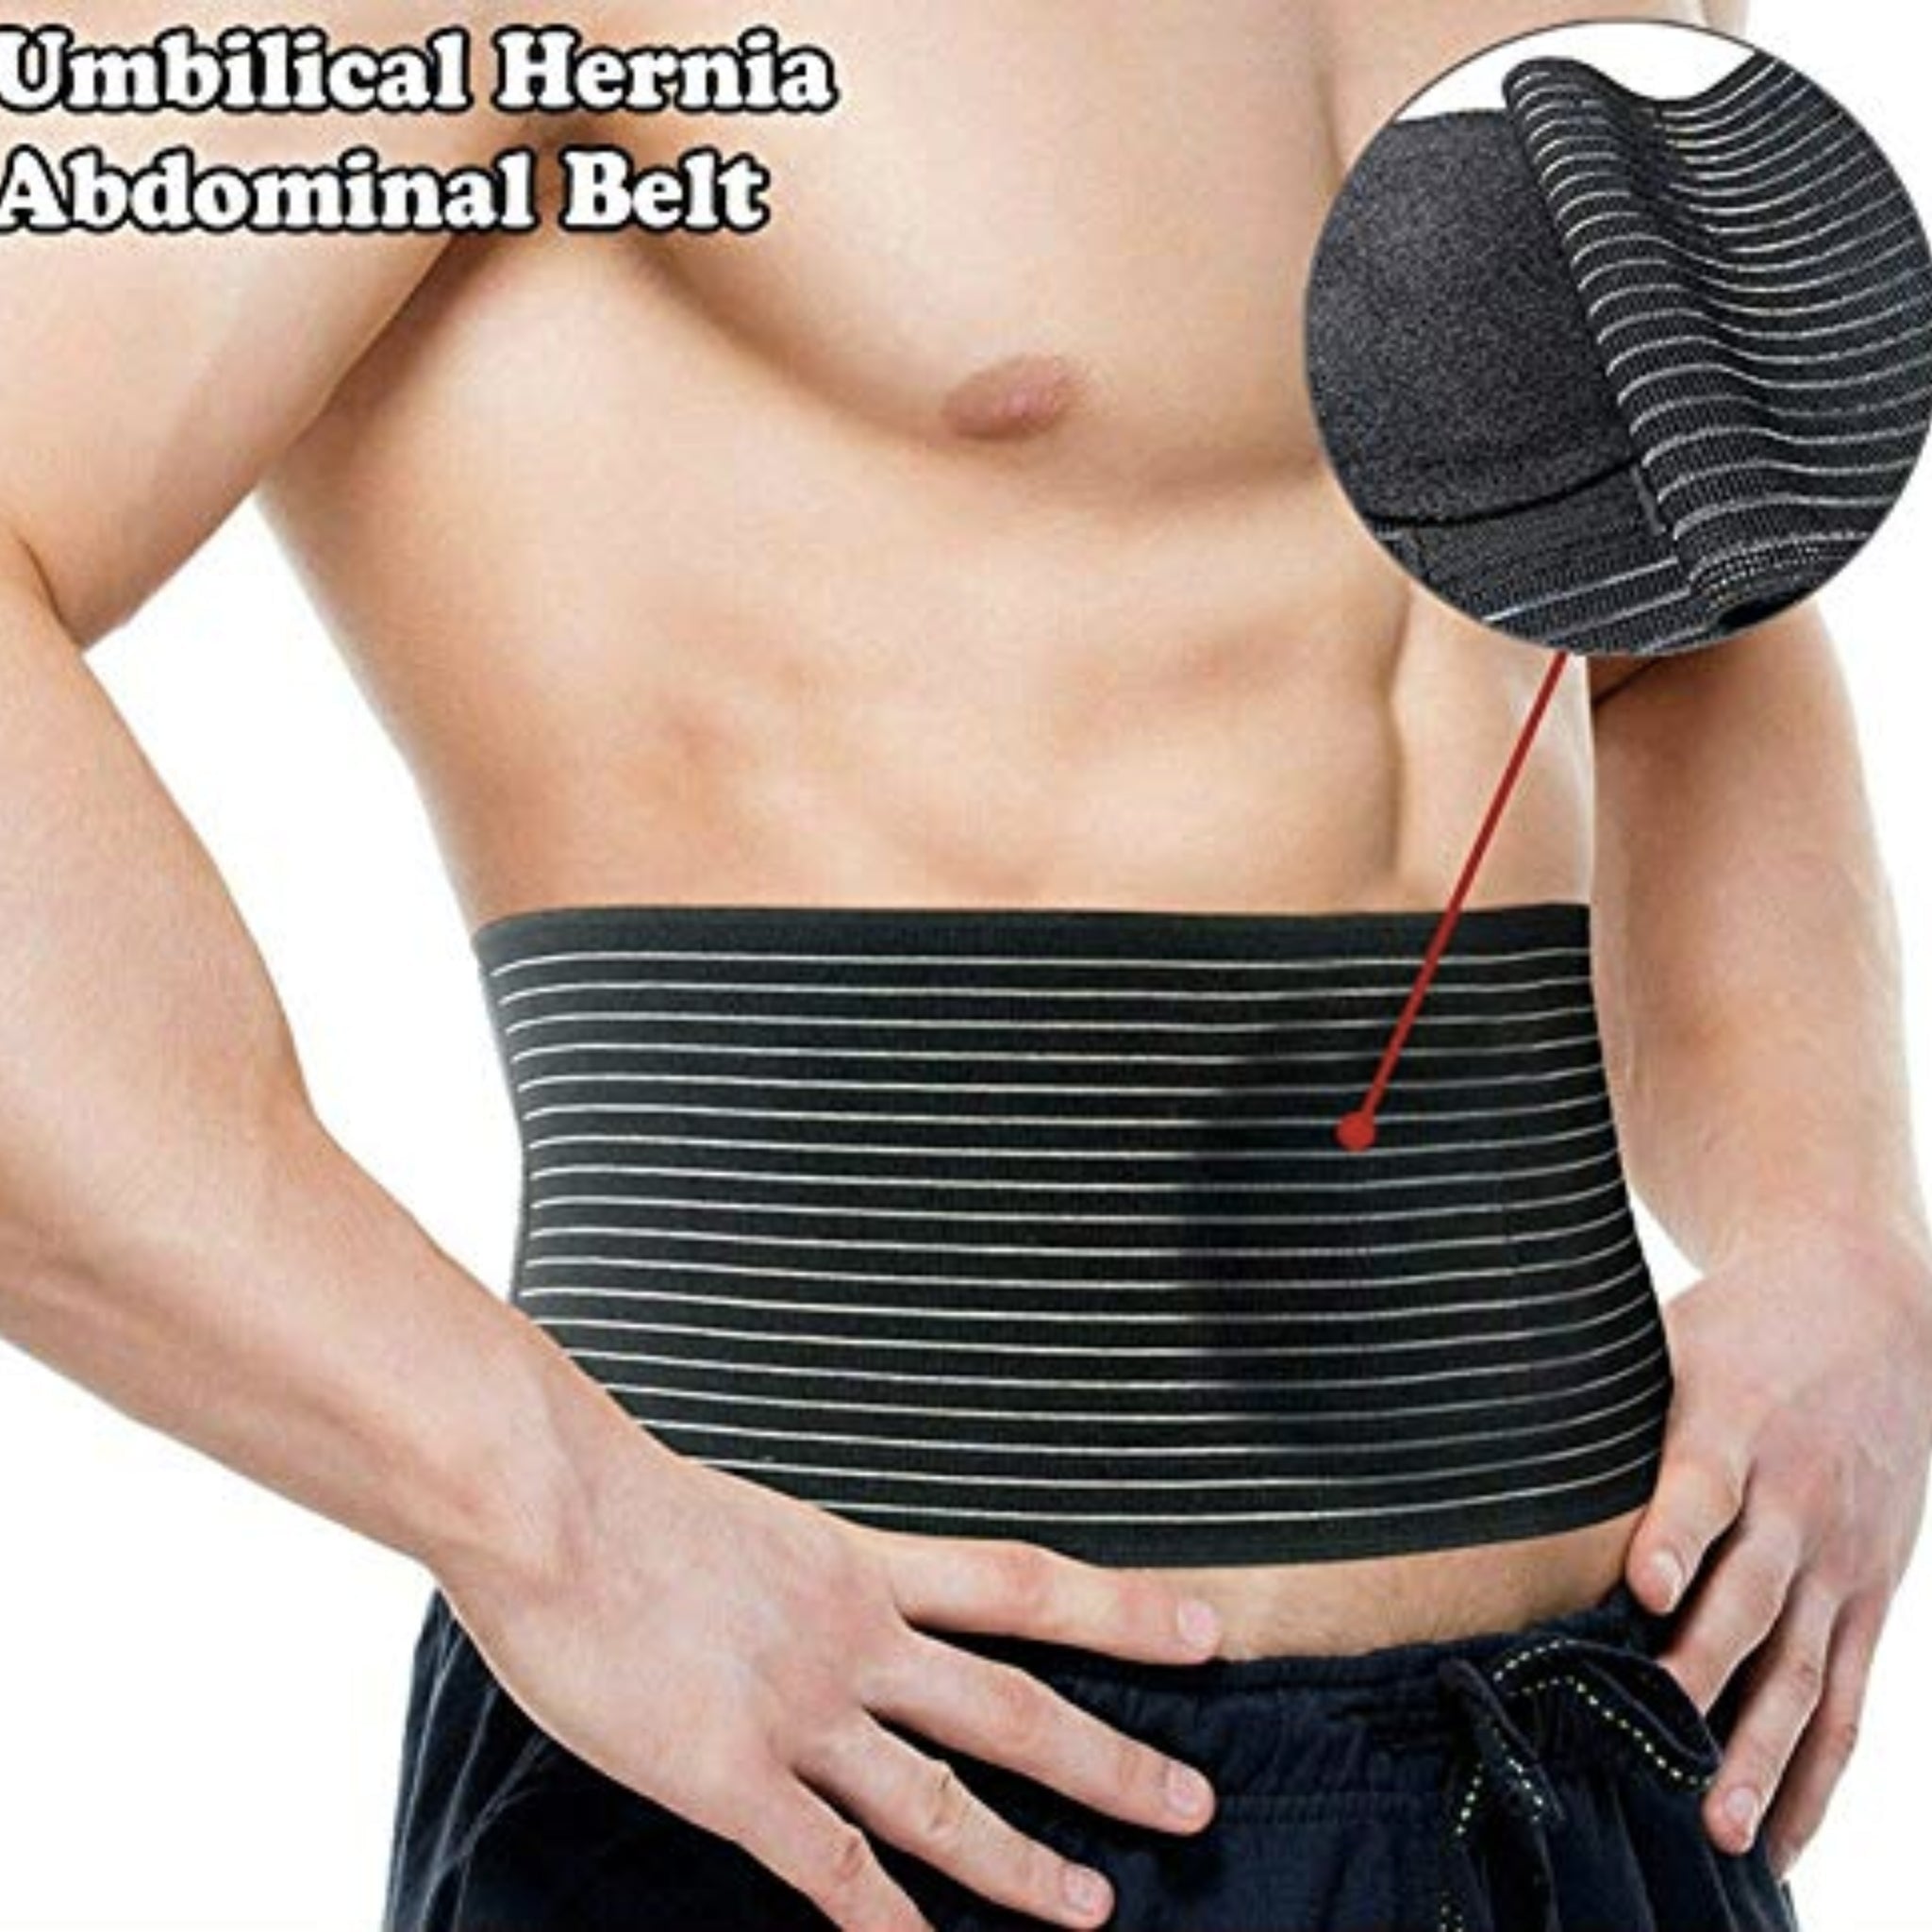 High-Quality Umbilical Hernia Belt with Support Pad - Navel, Ventral,  Epigast